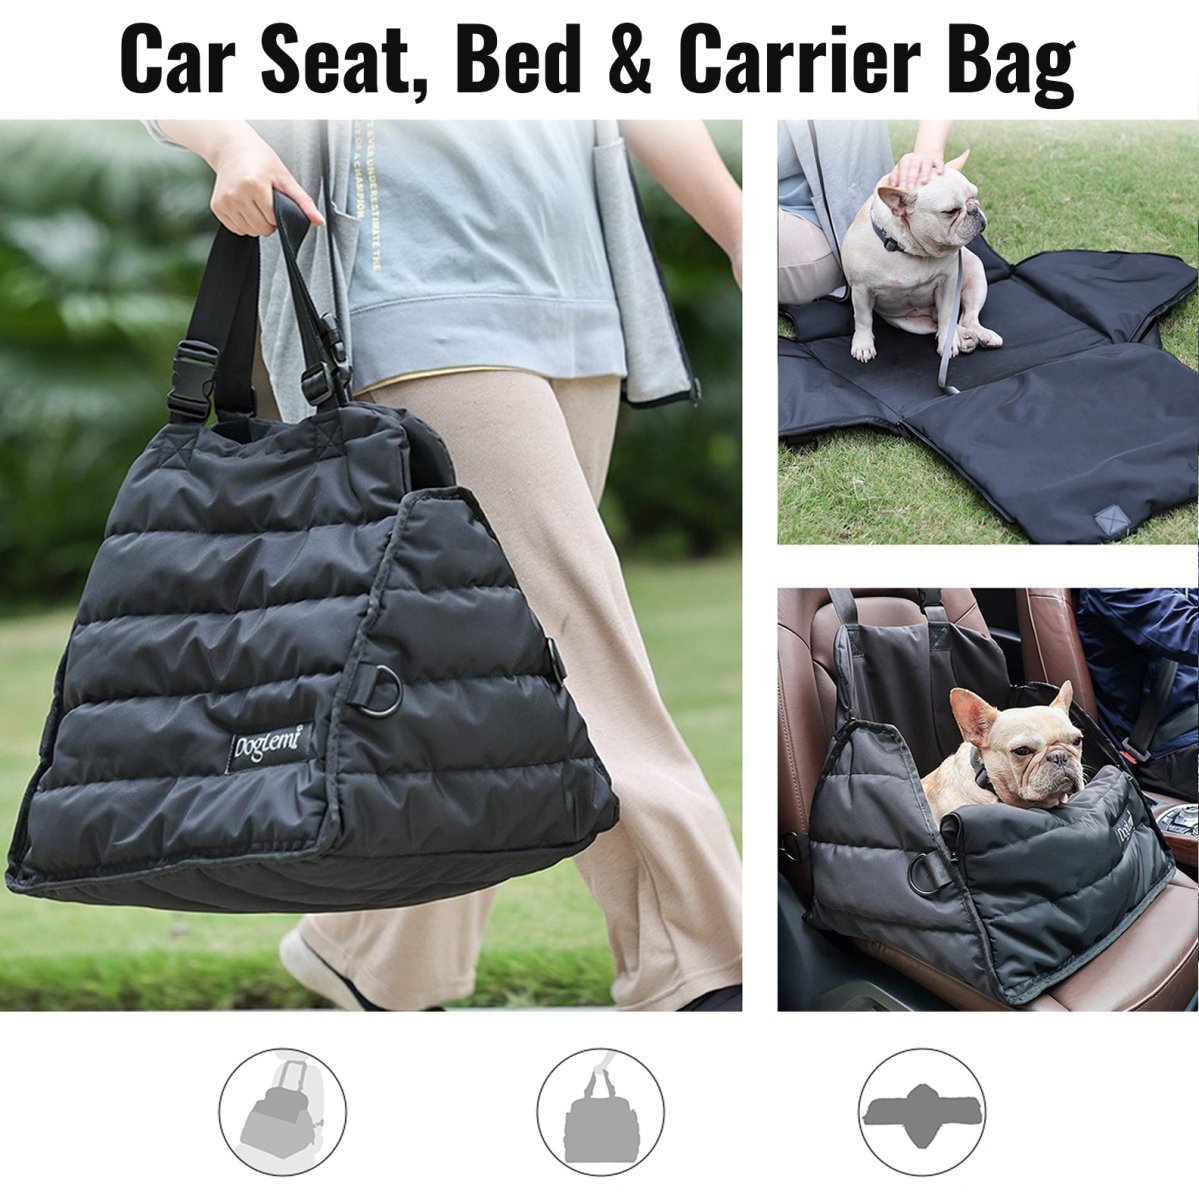 Functional French Bulldog's Car Seat, Bed & Carrier Bag - French Bulldog Store